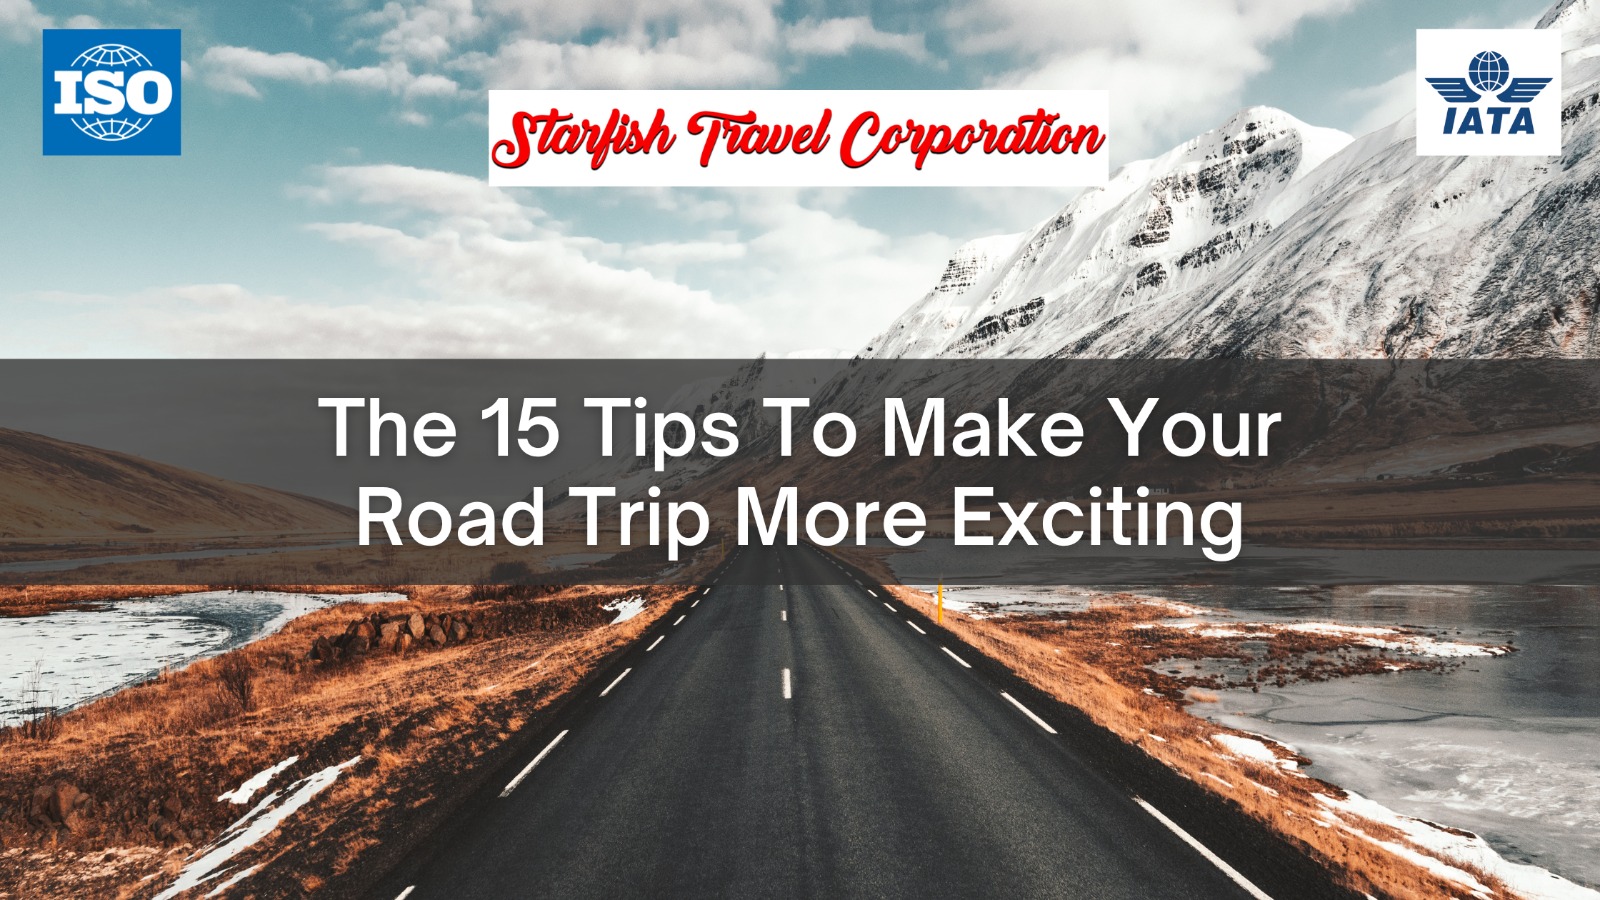 The 15 Tips To Make Your Road Trip More Exciting